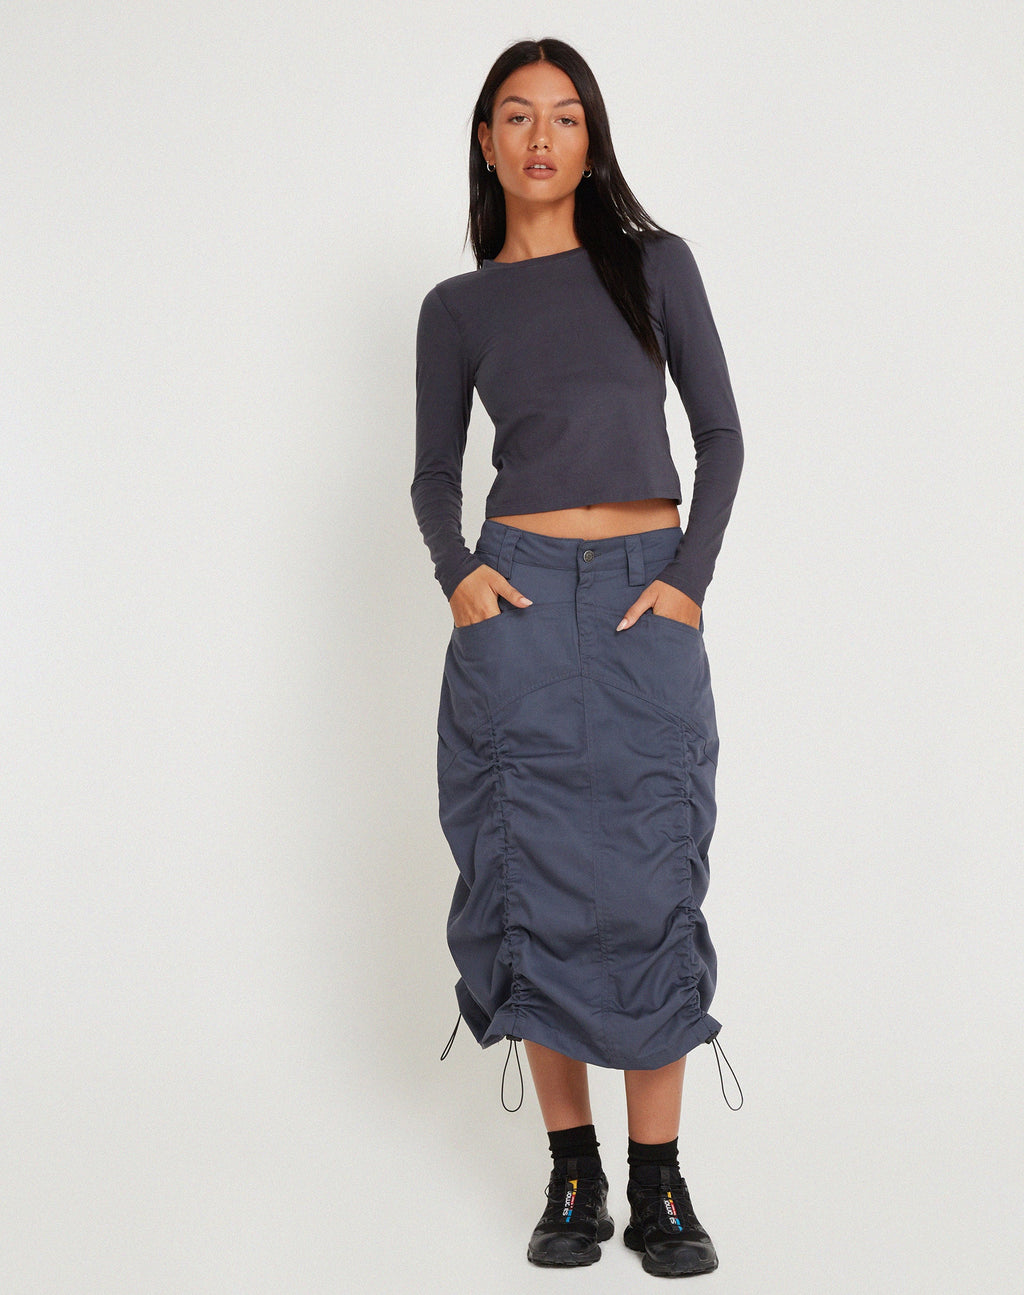 Eisig Cargo Midi Skirt in Charcoal Navy